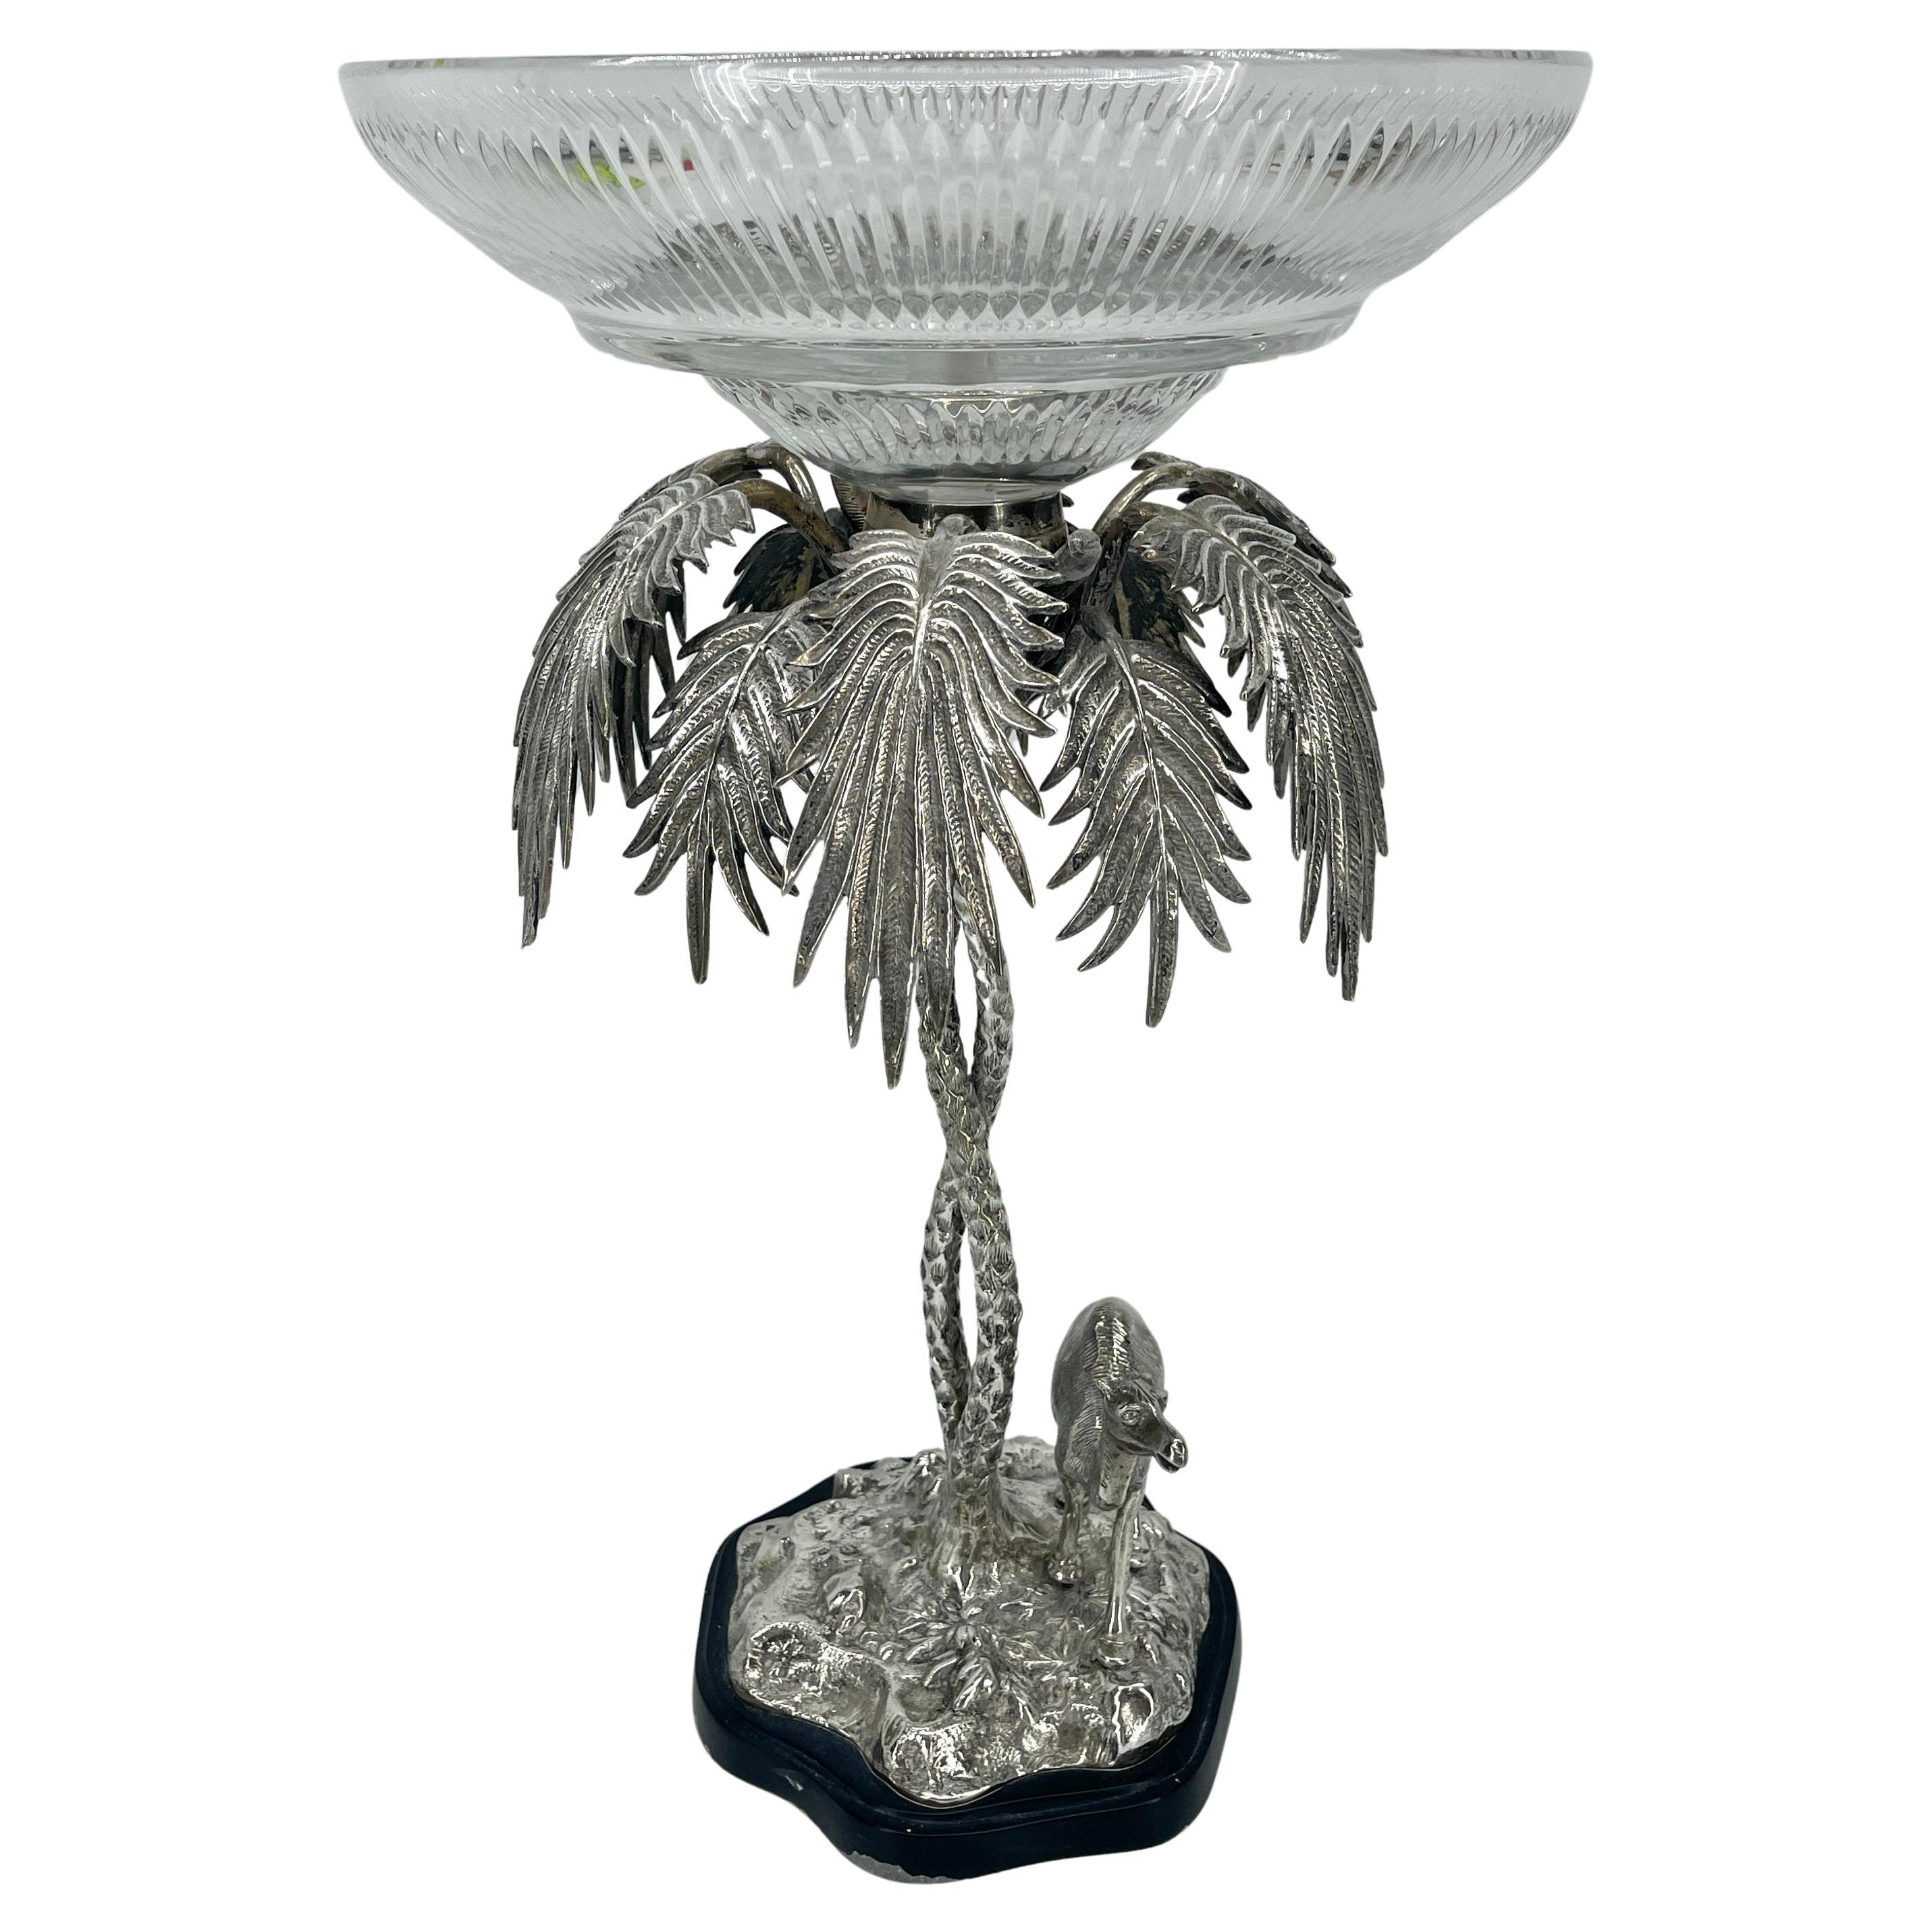 Metal Large Elkington Epergne Centerpiece With Camel, Palm Tree and Glass Bowl For Sale